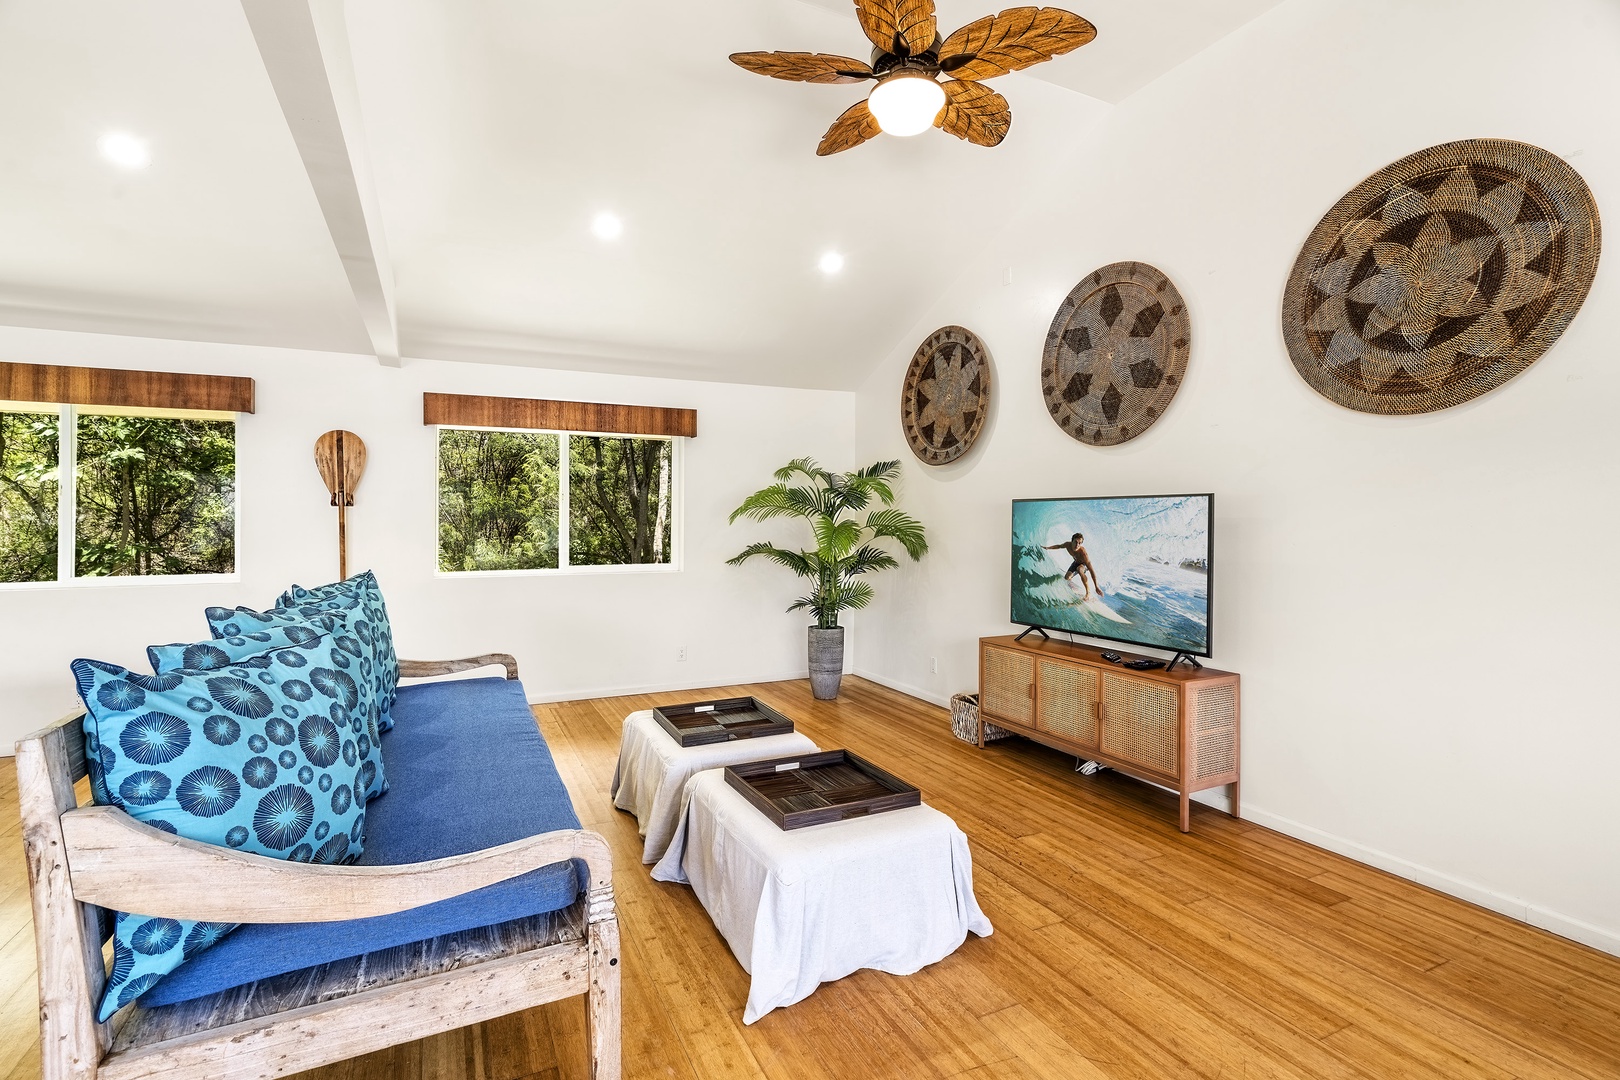 Kailua Kona Vacation Rentals, Lymans Bay Hale - Sit and enjoy your favorite show's in the comfort of A/C